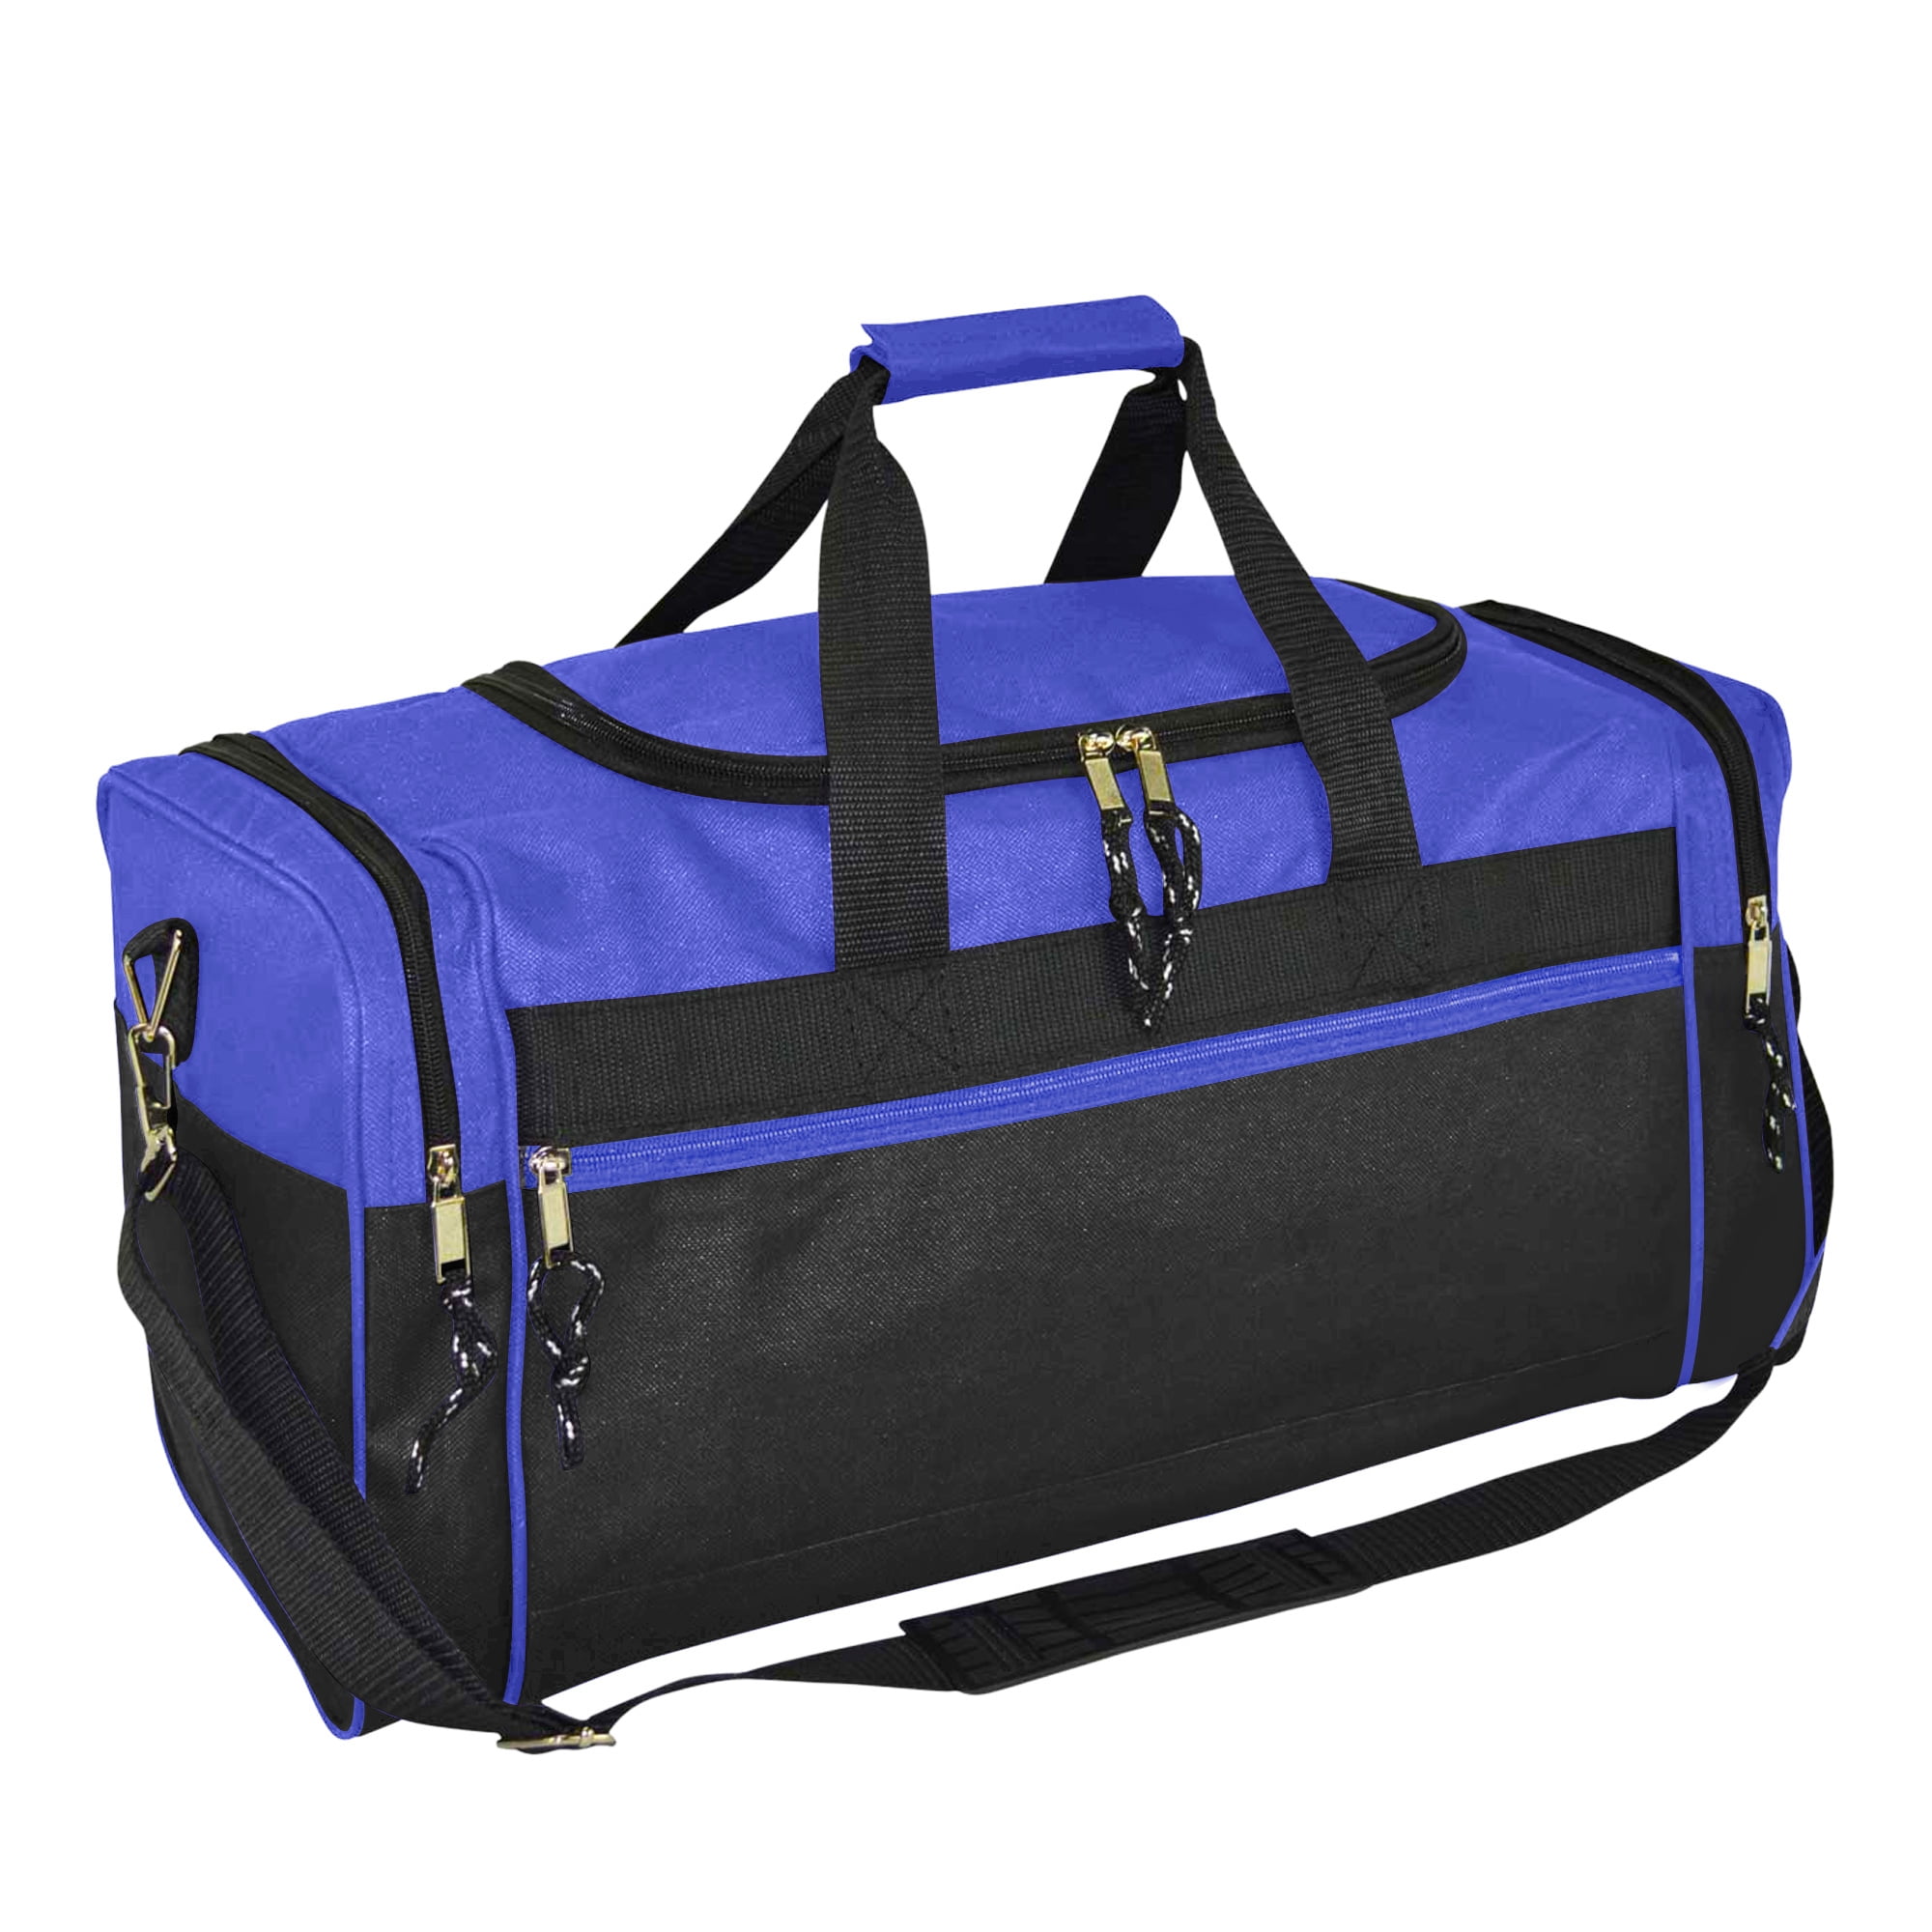 20" Large Duffle Bag Duffel Workout Exercise Travel Gym Bag Blue Red Black Sport